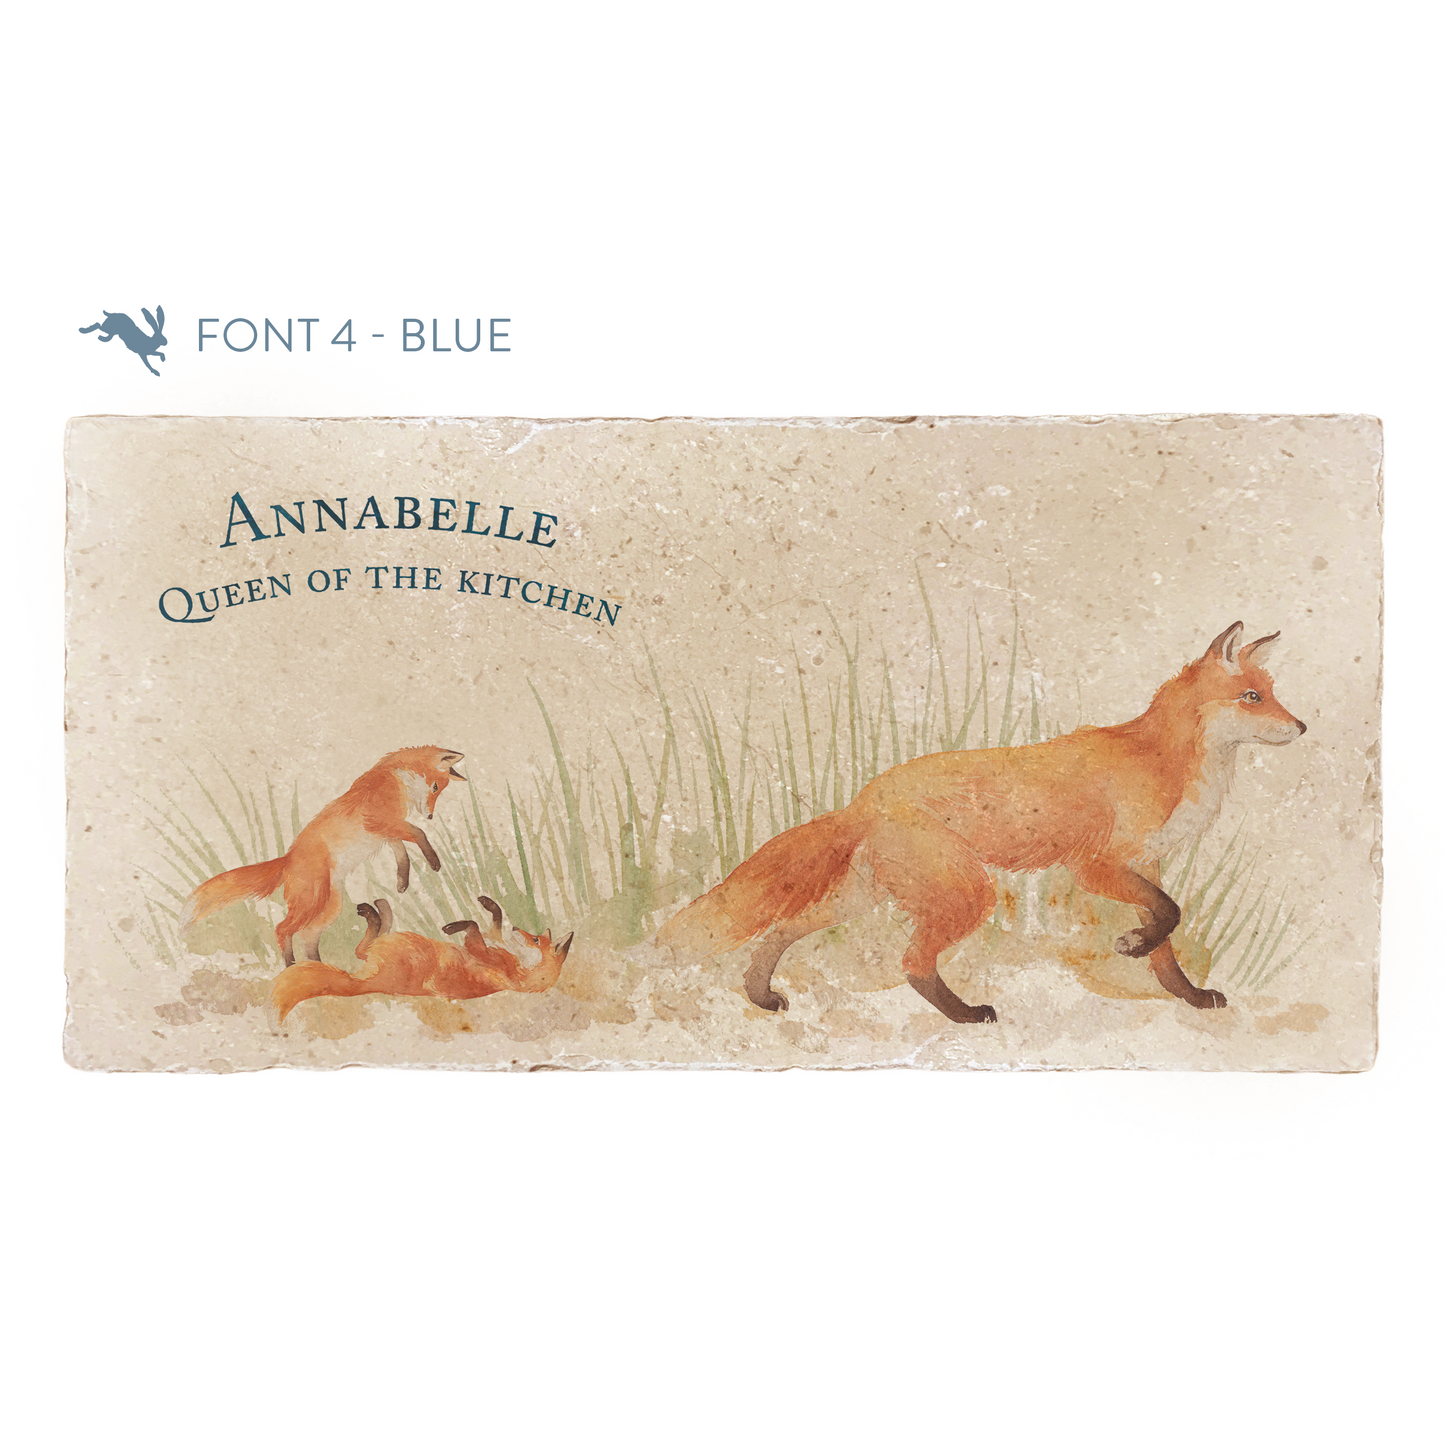 A personalised rectangular marble sharing platter featuring a fox design. The example personalised dark blue text reads 'Annabelle Queen of the Kitchen' in a classic serif font.